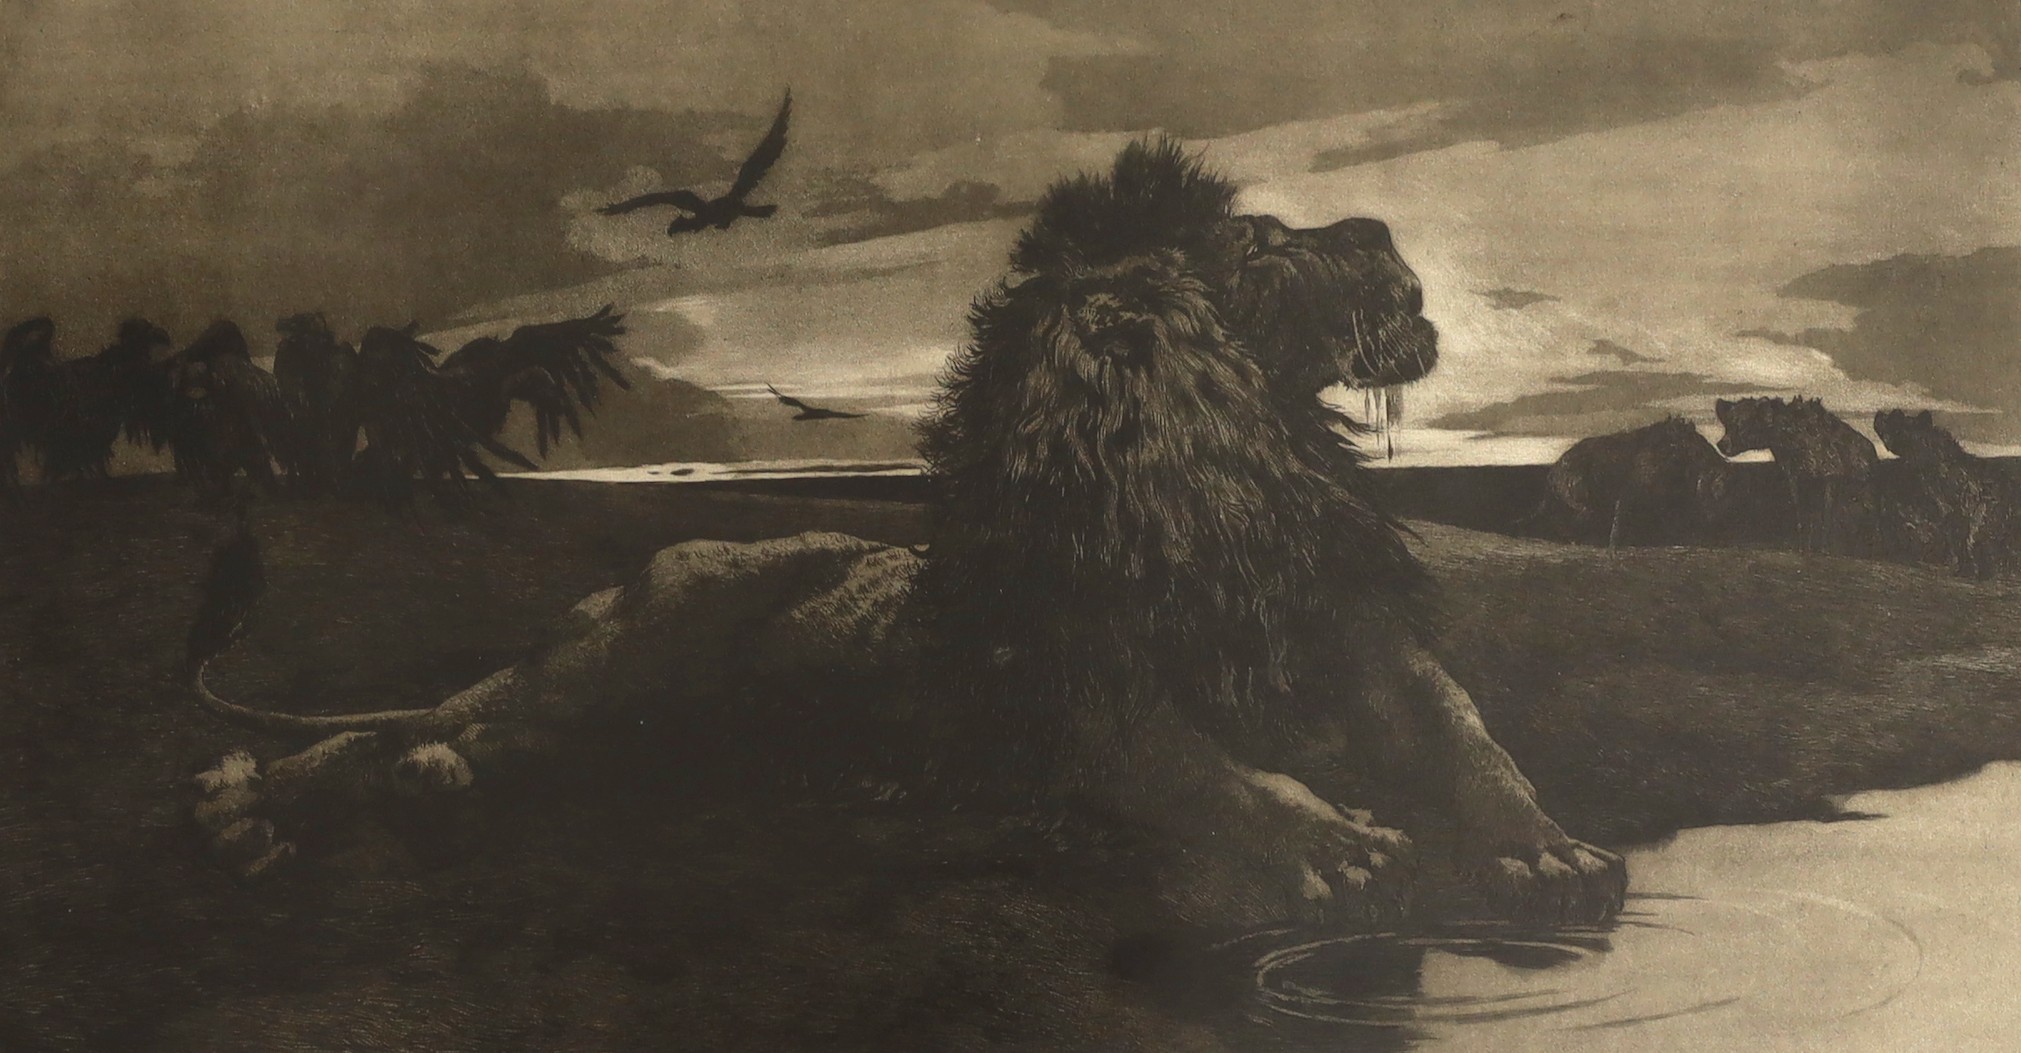 Herbert Thomas Dicksee (1862-1942), etching, 'The Dying Lion', 25 x 47cm with full margins, unframed